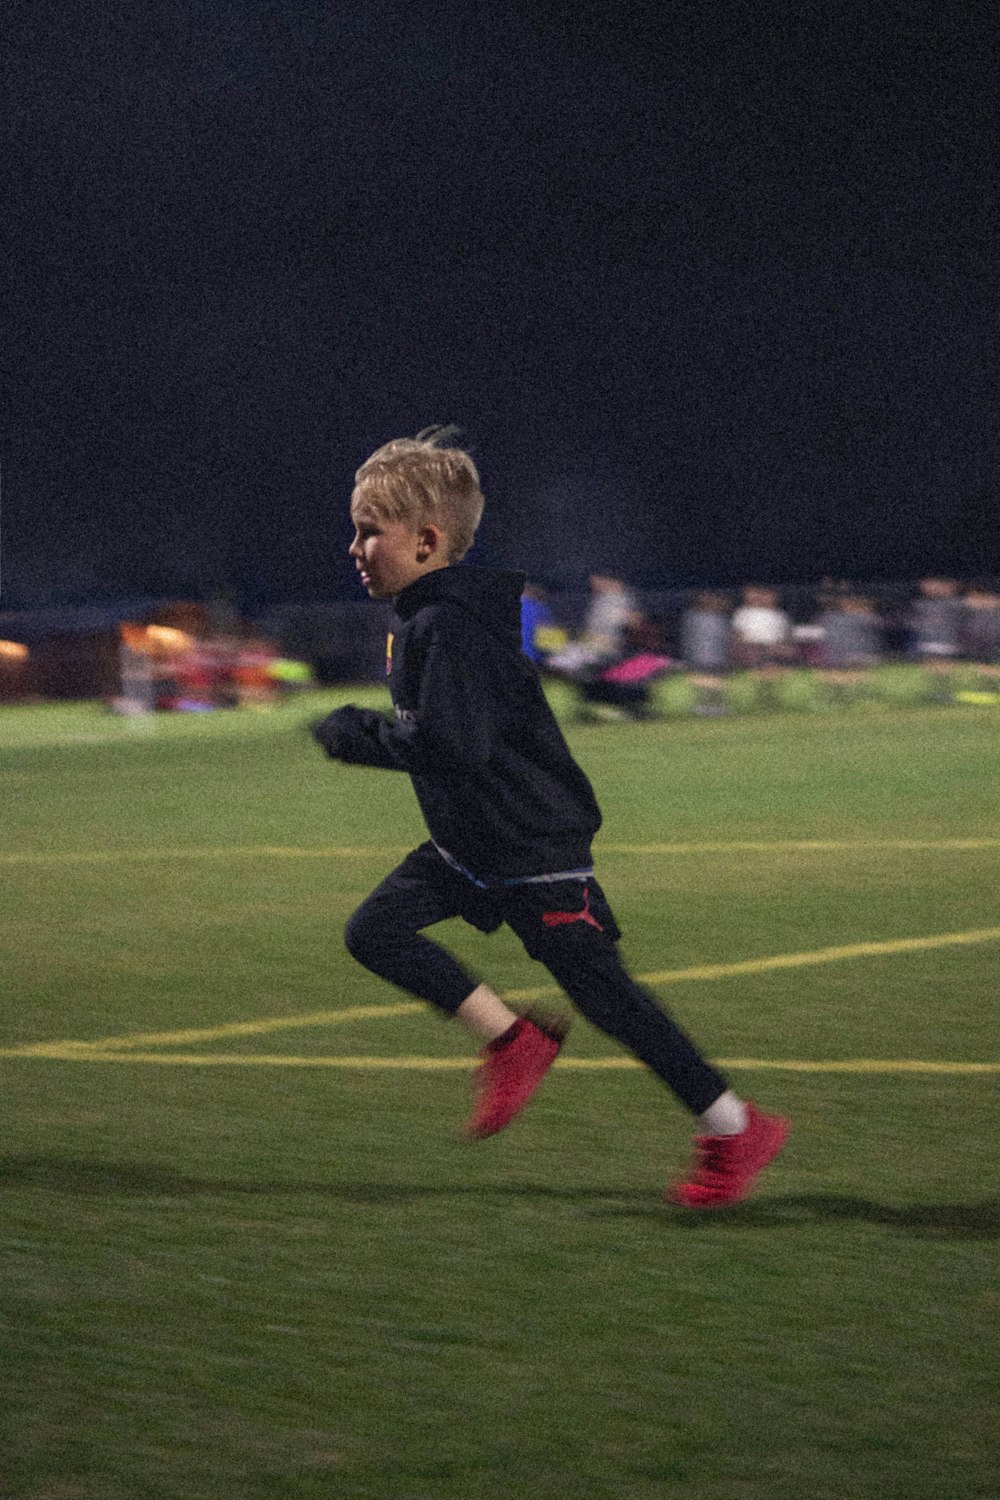 boy in blue long sleeve shirt and black pants running on green grass field during daytime